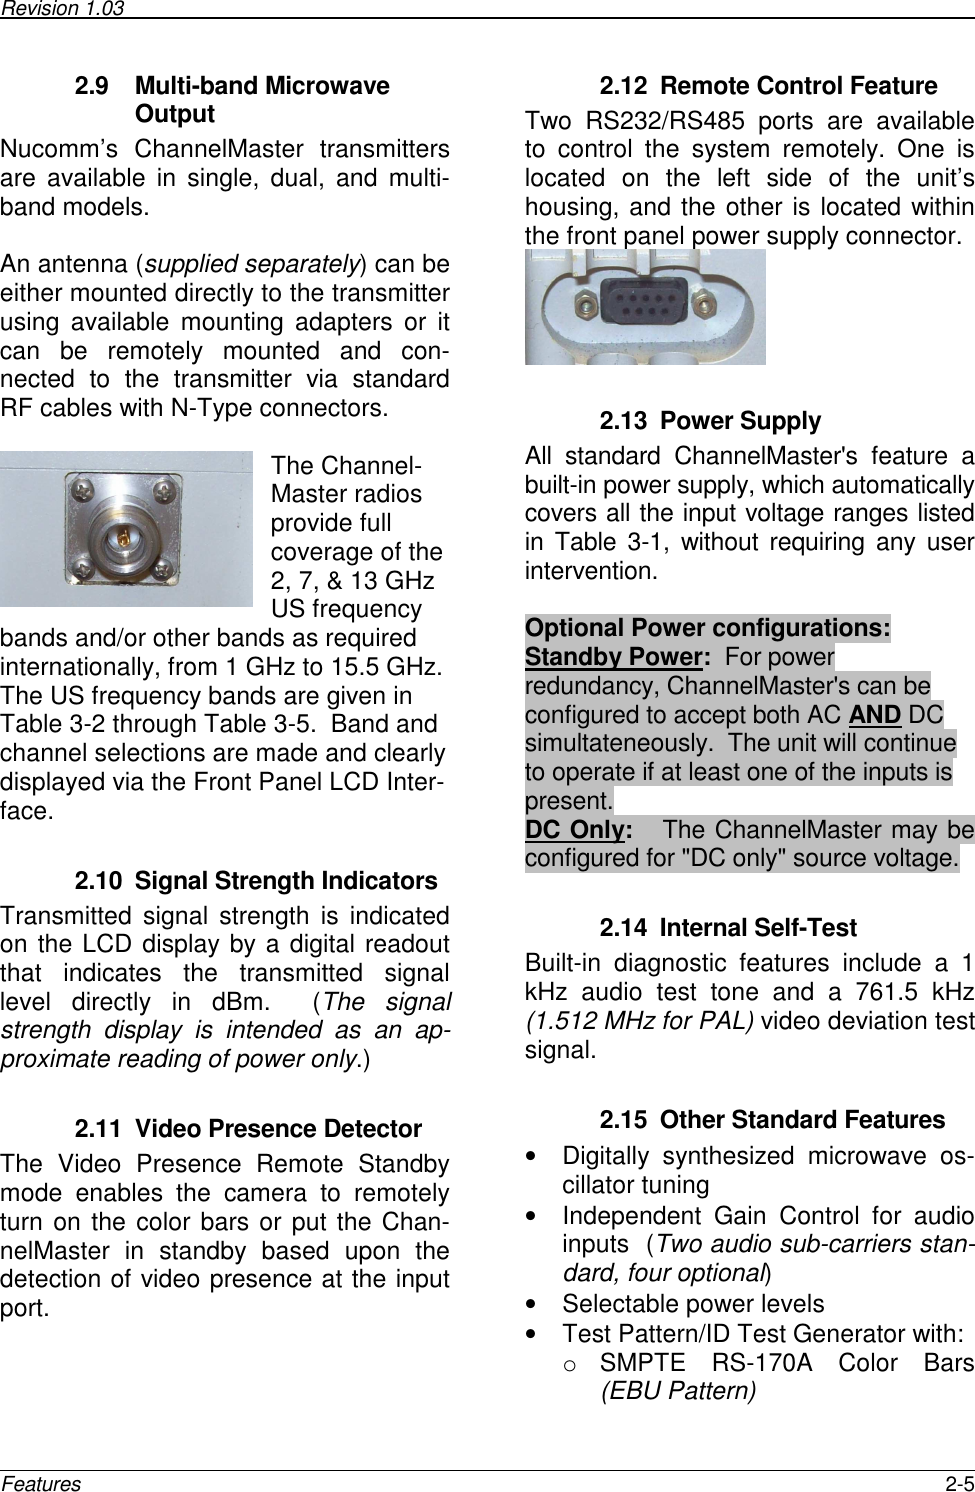 Revision 1.03      Features  2-5 2.9  Multi-band Microwave Output  Nucomm’s  ChannelMaster  transmitters are  available  in  single,  dual,  and  multi-band models.    An antenna (supplied separately) can be either mounted directly to the transmitter using  available  mounting  adapters  or  it can  be  remotely  mounted  and  con-nected  to  the  transmitter  via  standard RF cables with N-Type connectors.    The Channel-Master radios provide full coverage of the 2, 7, &amp; 13 GHz US frequency bands and/or other bands as required internationally, from 1 GHz to 15.5 GHz.  The US frequency bands are given in Table 3-2 through Table 3-5.  Band and channel selections are made and clearly displayed via the Front Panel LCD Inter-face.  2.10  Signal Strength Indicators Transmitted  signal  strength  is  indicated on the LCD display by a digital readout that  indicates  the  transmitted  signal level  directly  in  dBm.    (The  signal strength  display  is  intended  as  an  ap-proximate reading of power only.)  2.11  Video Presence Detector The  Video  Presence  Remote  Standby mode  enables  the  camera  to  remotely turn on the color bars or put the Chan-nelMaster  in  standby  based  upon  the detection of video presence at the input port.  2.12  Remote Control Feature Two  RS232/RS485  ports  are  available to  control  the  system  remotely.  One  is located  on  the  left  side  of  the  unit’s housing, and the other is located within the front panel power supply connector.   2.13  Power Supply All  standard  ChannelMaster&apos;s  feature  a built-in power supply, which automatically covers all the input voltage ranges listed in Table  3-1,  without  requiring  any user intervention.   Optional Power configurations: Standby Power:  For power redundancy, ChannelMaster&apos;s can be configured to accept both AC AND DC simultateneously.  The unit will continue to operate if at least one of the inputs is present. DC Only:    The ChannelMaster may be configured for &quot;DC only&quot; source voltage.   2.14  Internal Self-Test Built-in  diagnostic  features  include  a  1 kHz  audio  test  tone  and  a  761.5  kHz (1.512 MHz for PAL) video deviation test signal.   2.15  Other Standard Features •  Digitally  synthesized  microwave  os-cillator tuning •  Independent  Gain  Control  for  audio inputs  (Two audio sub-carriers stan-dard, four optional) •  Selectable power levels •  Test Pattern/ID Test Generator with: o  SMPTE  RS-170A  Color  Bars (EBU Pattern) 